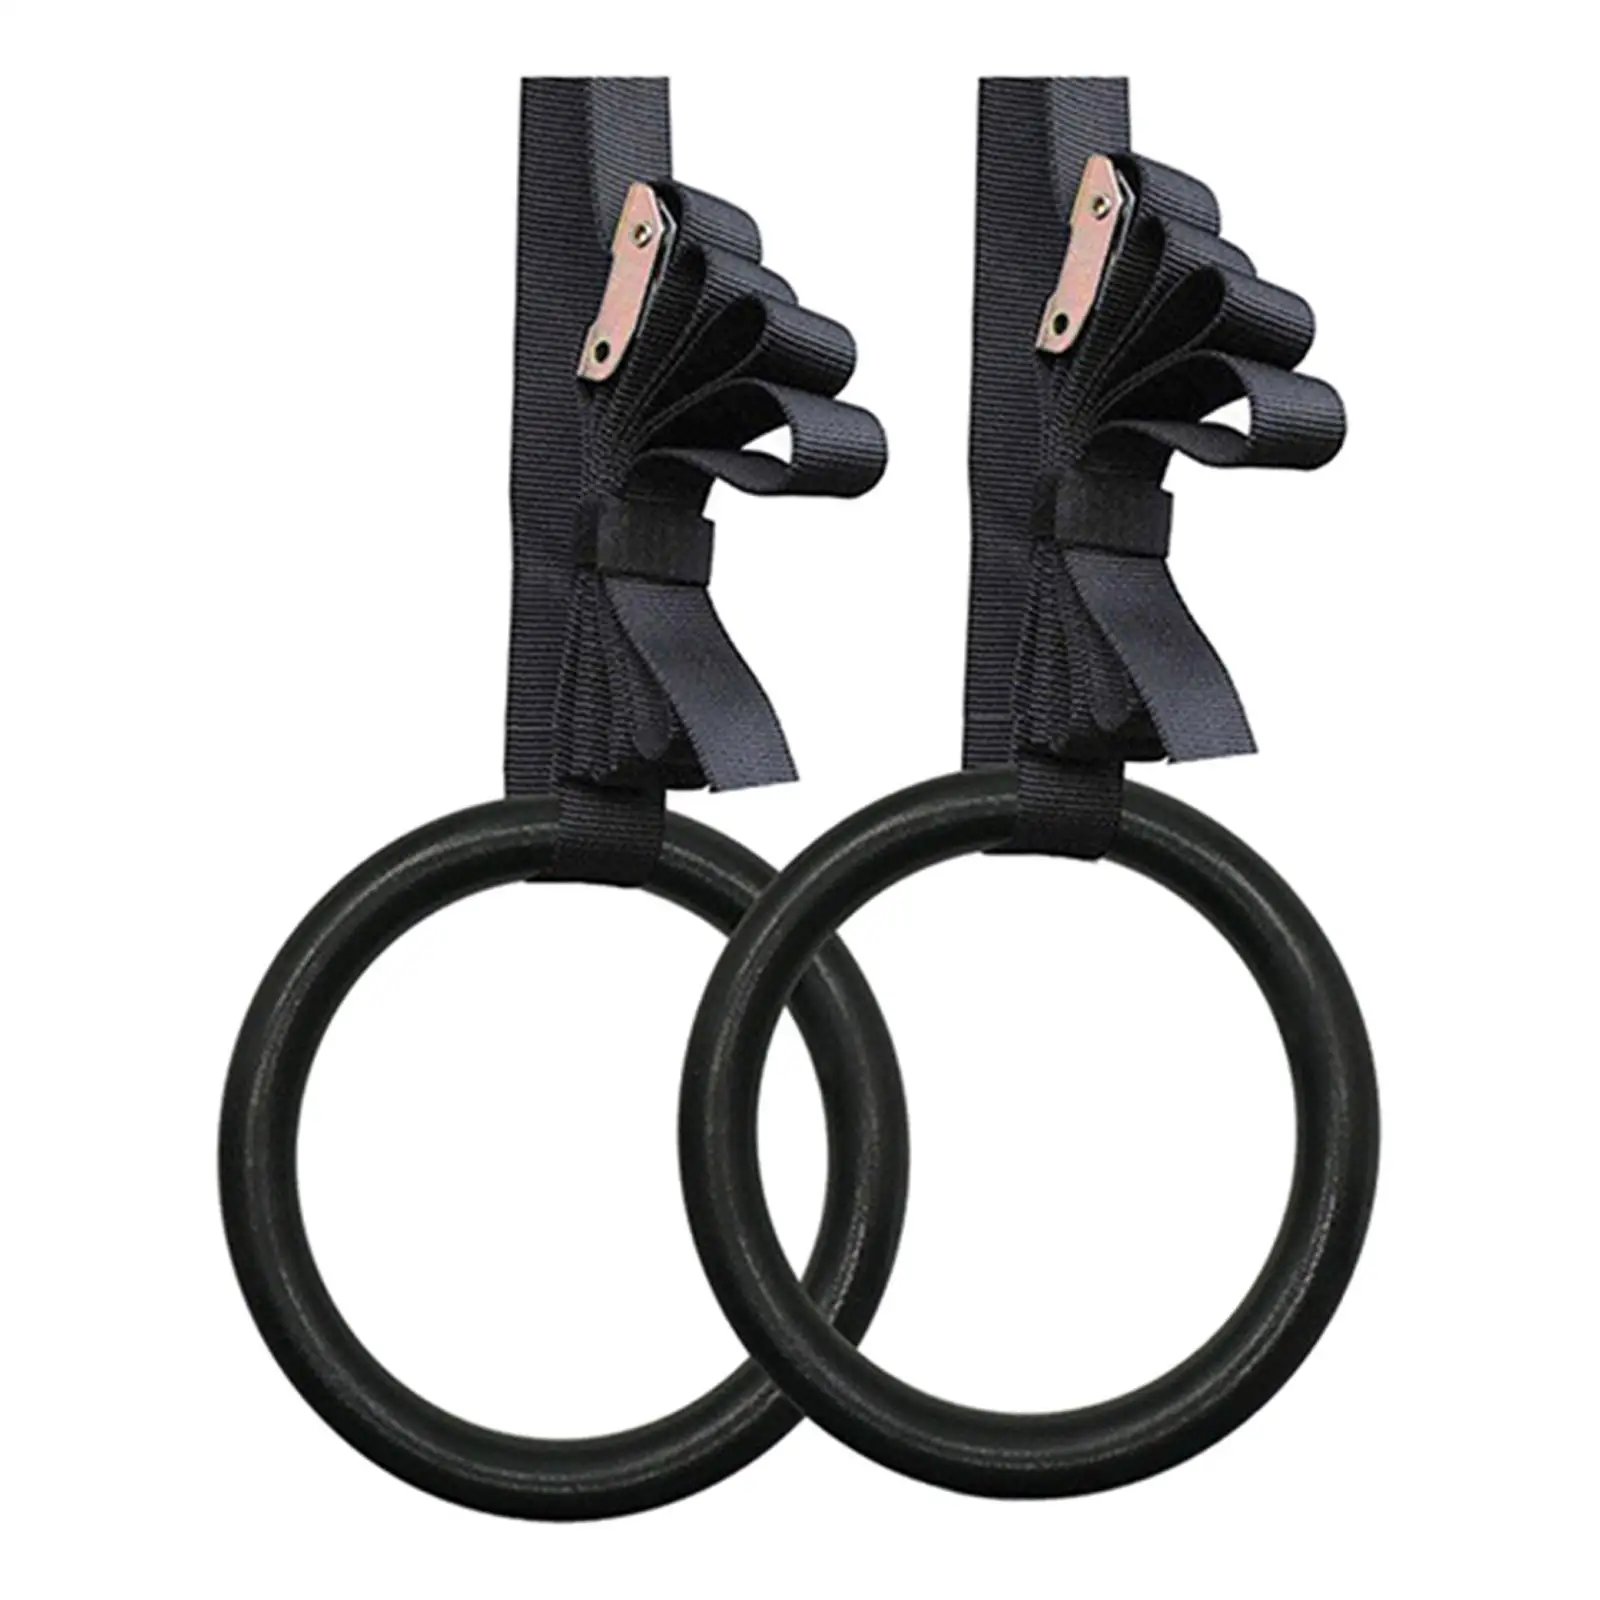 2Pcs Gymnastic Ring with Buckle Straps, Trainer Anti Slip Portable Unisex Gym